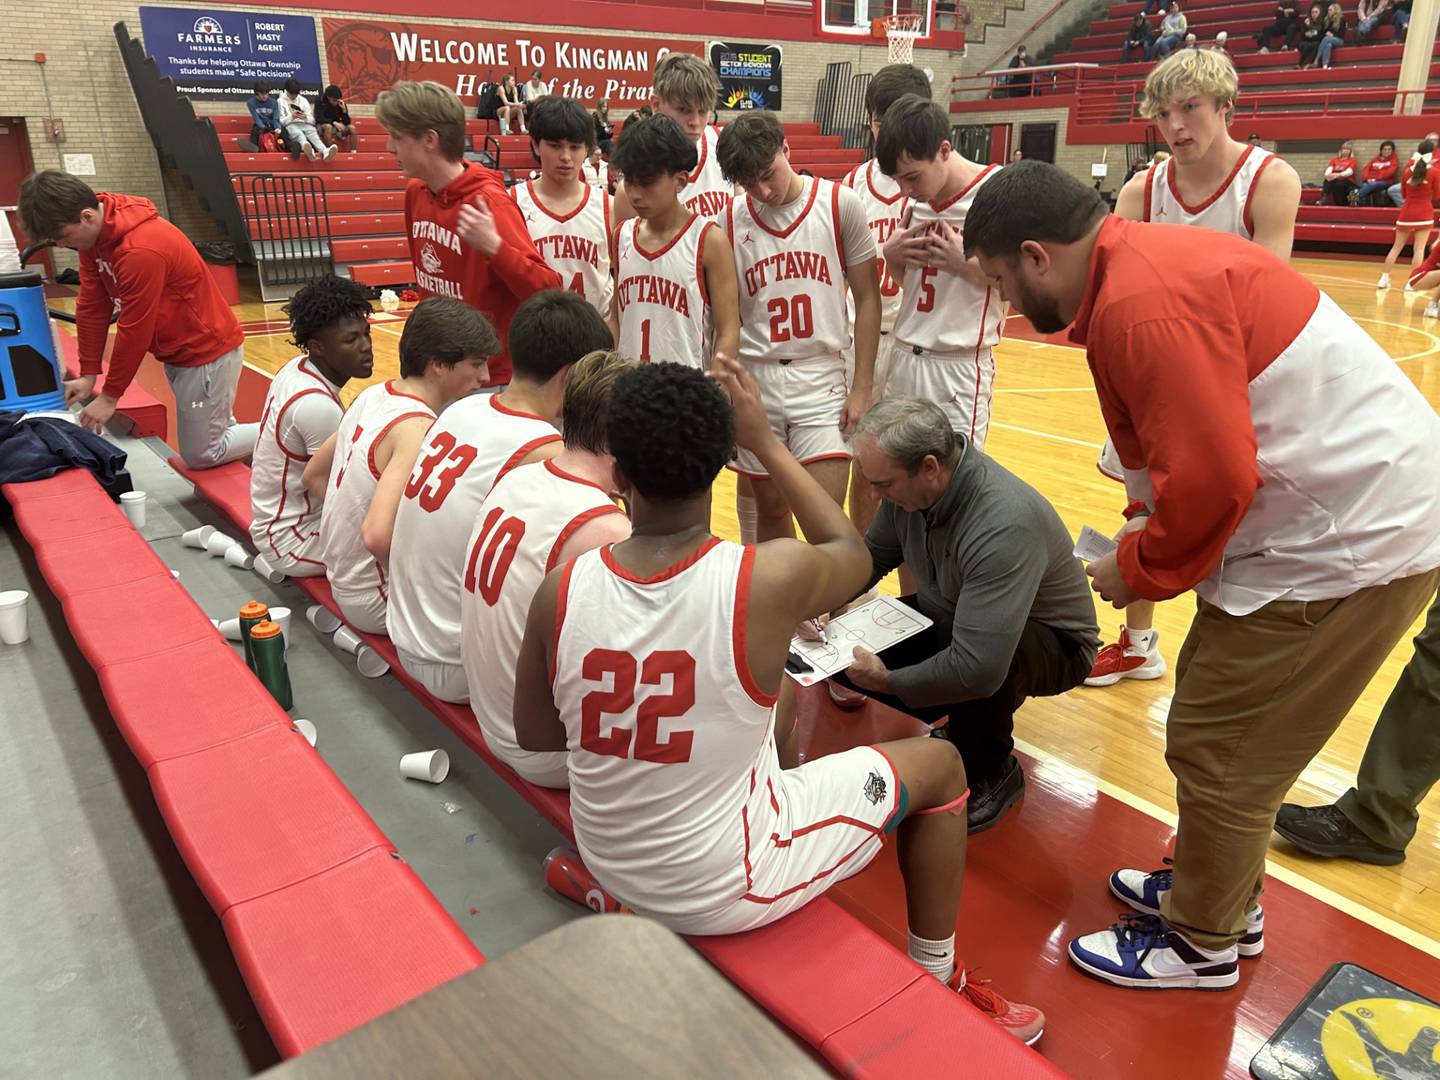 Ottawa coach Mark Cooper coaches up his team during a huddle in Tuesday's game at Kingman Gymnasium. He tied Dean Riley for most coaching wins in program history with 332. Cooper played for Riley at IVCC.